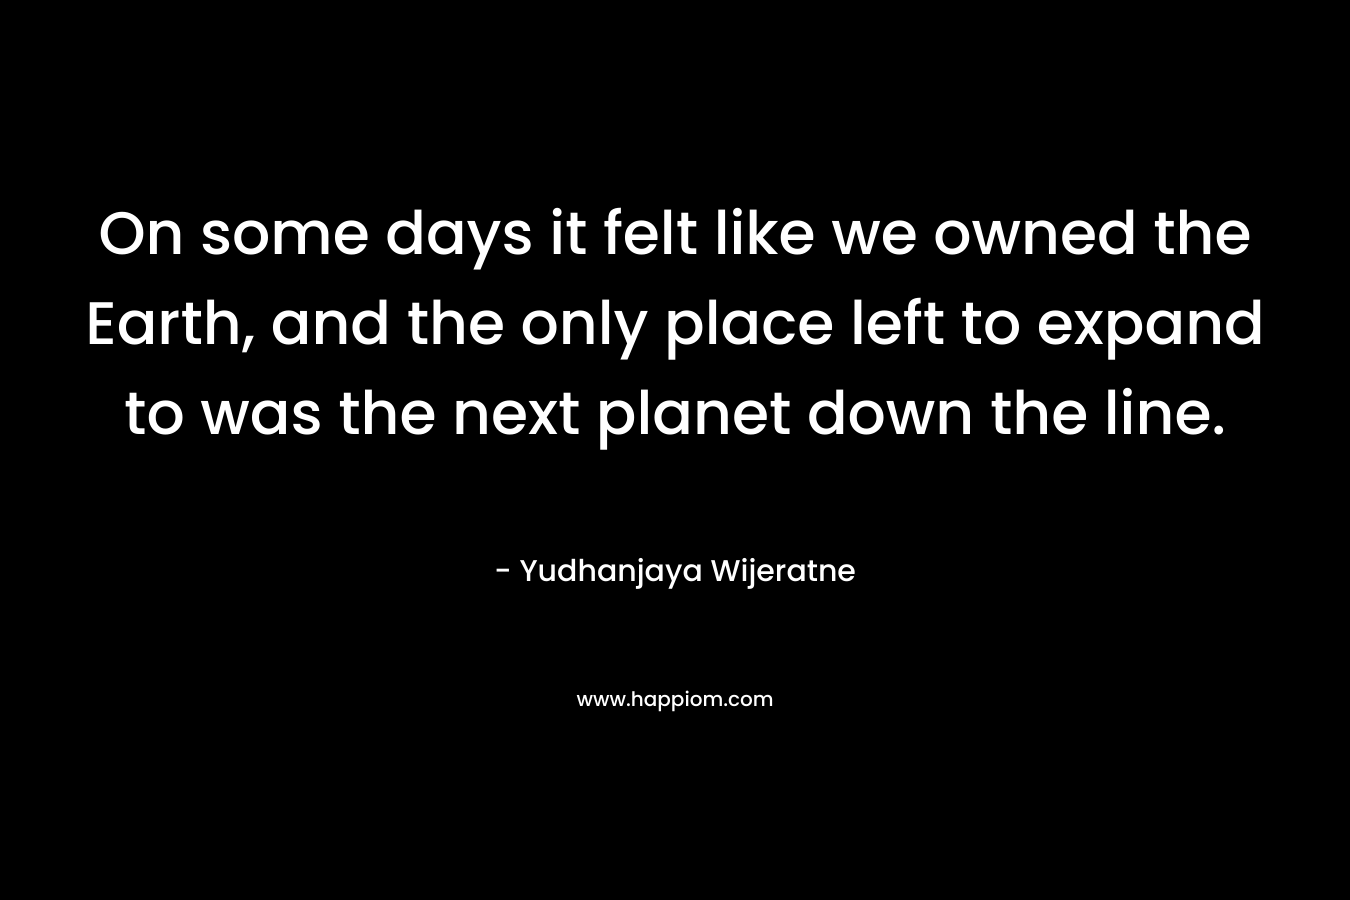 On some days it felt like we owned the Earth, and the only place left to expand to was the next planet down the line. – Yudhanjaya Wijeratne